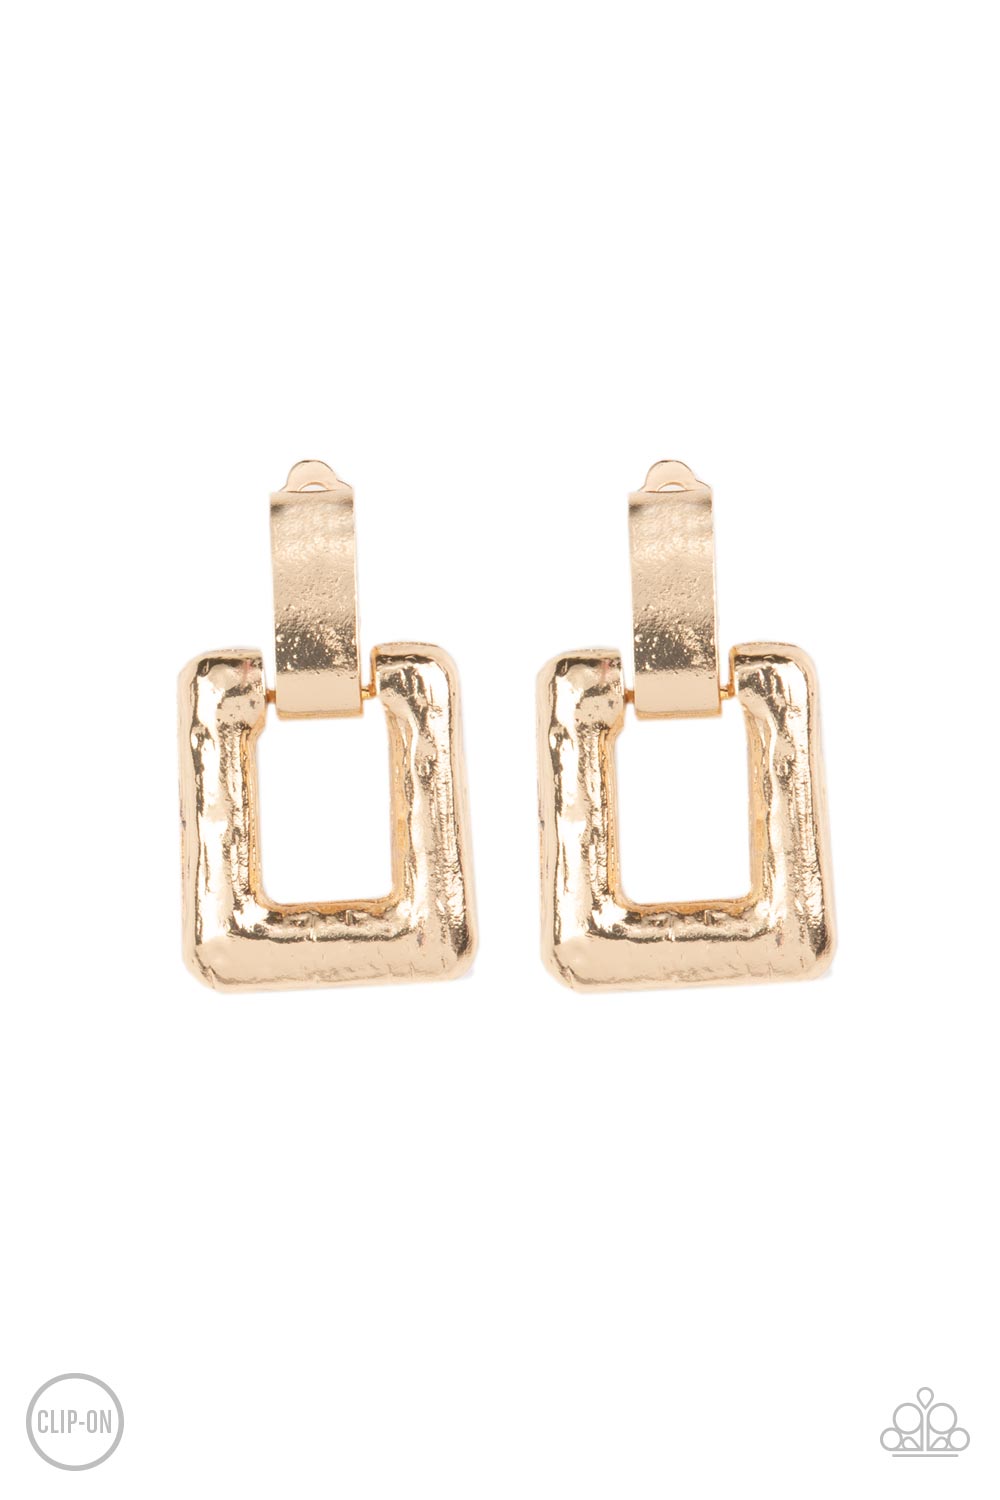 15 Minutes of FRAME Earrings - Gold